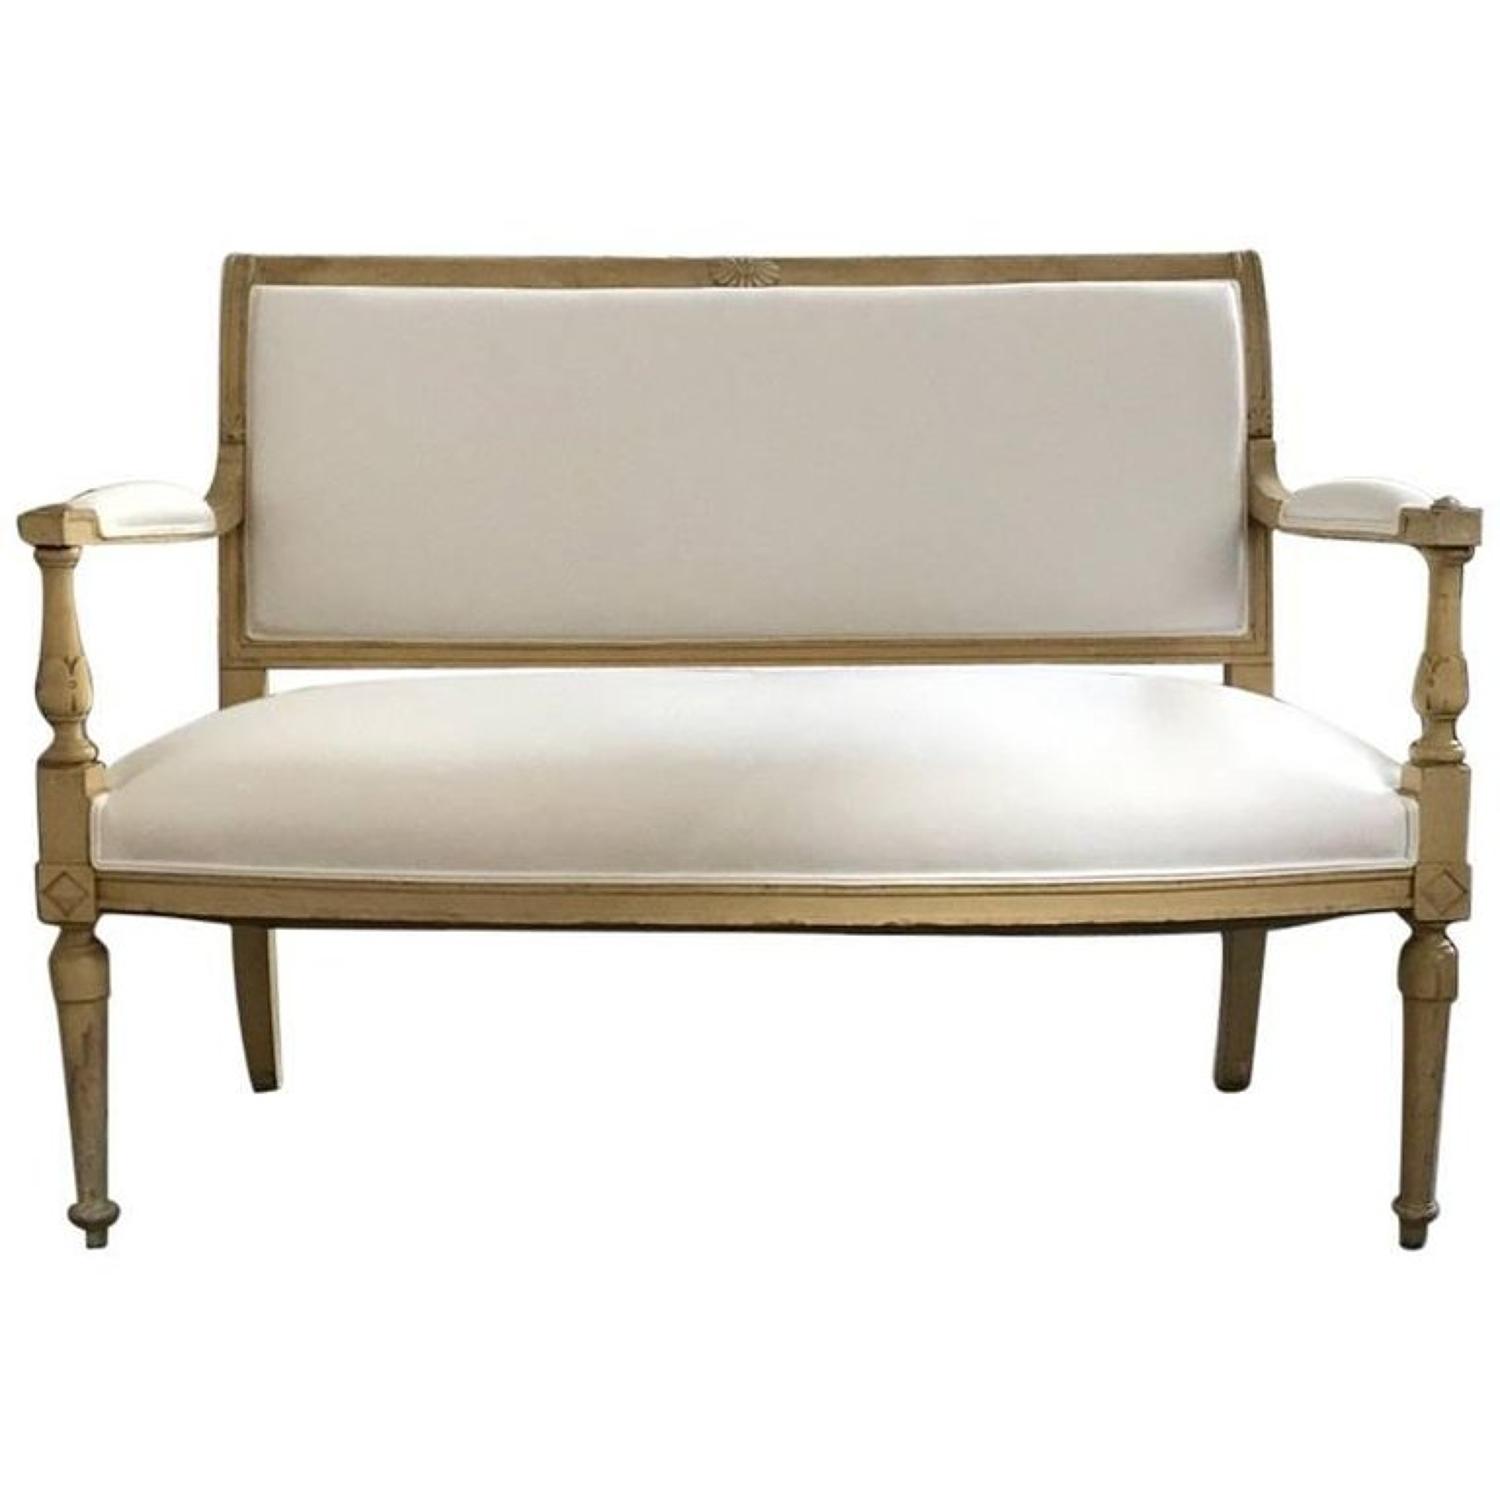 French Painted Directoire Style Canapé, Circa 1850